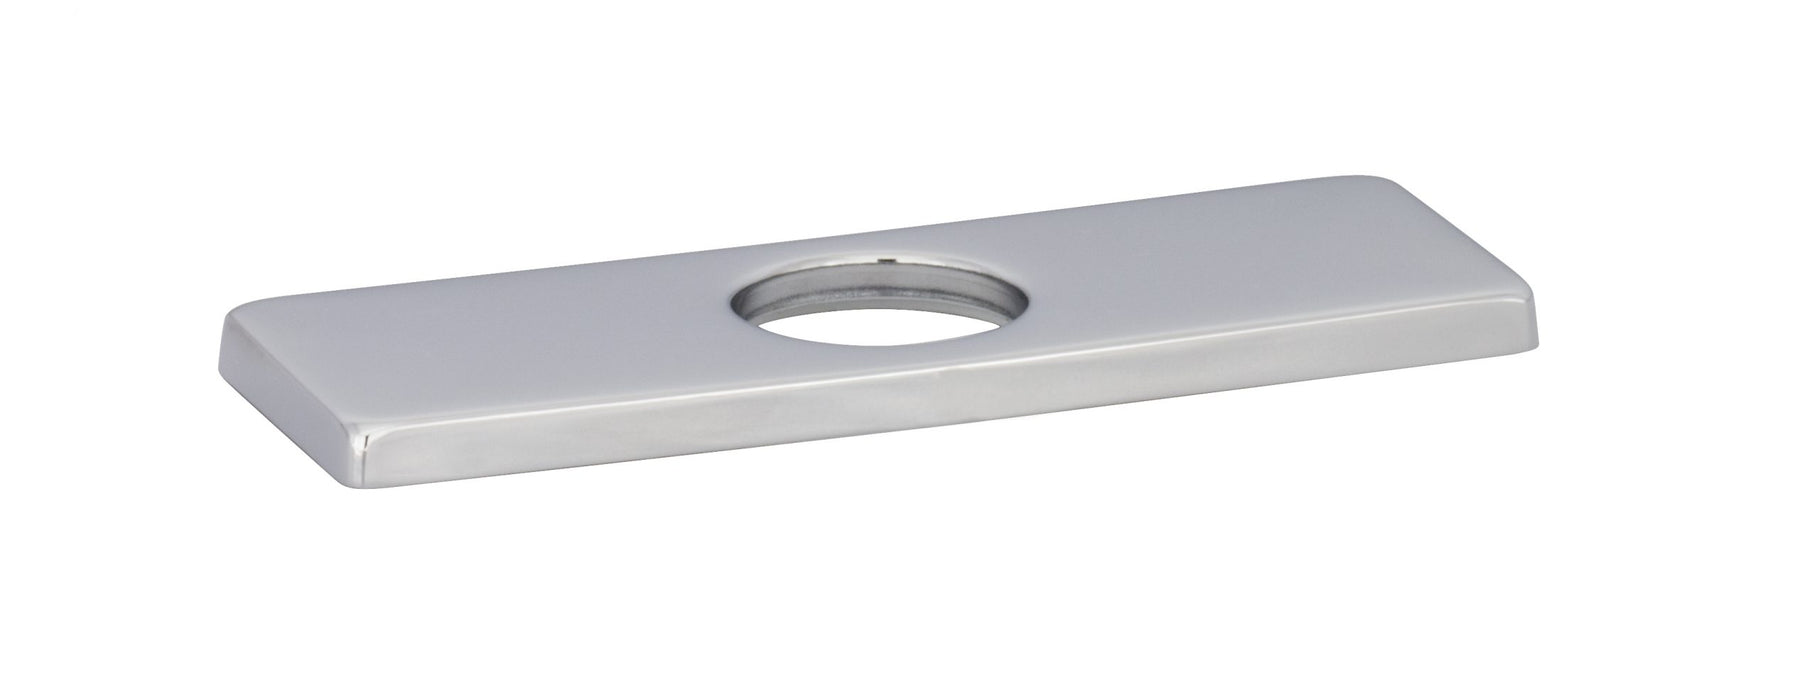 Rectangular plate for single hole faucet